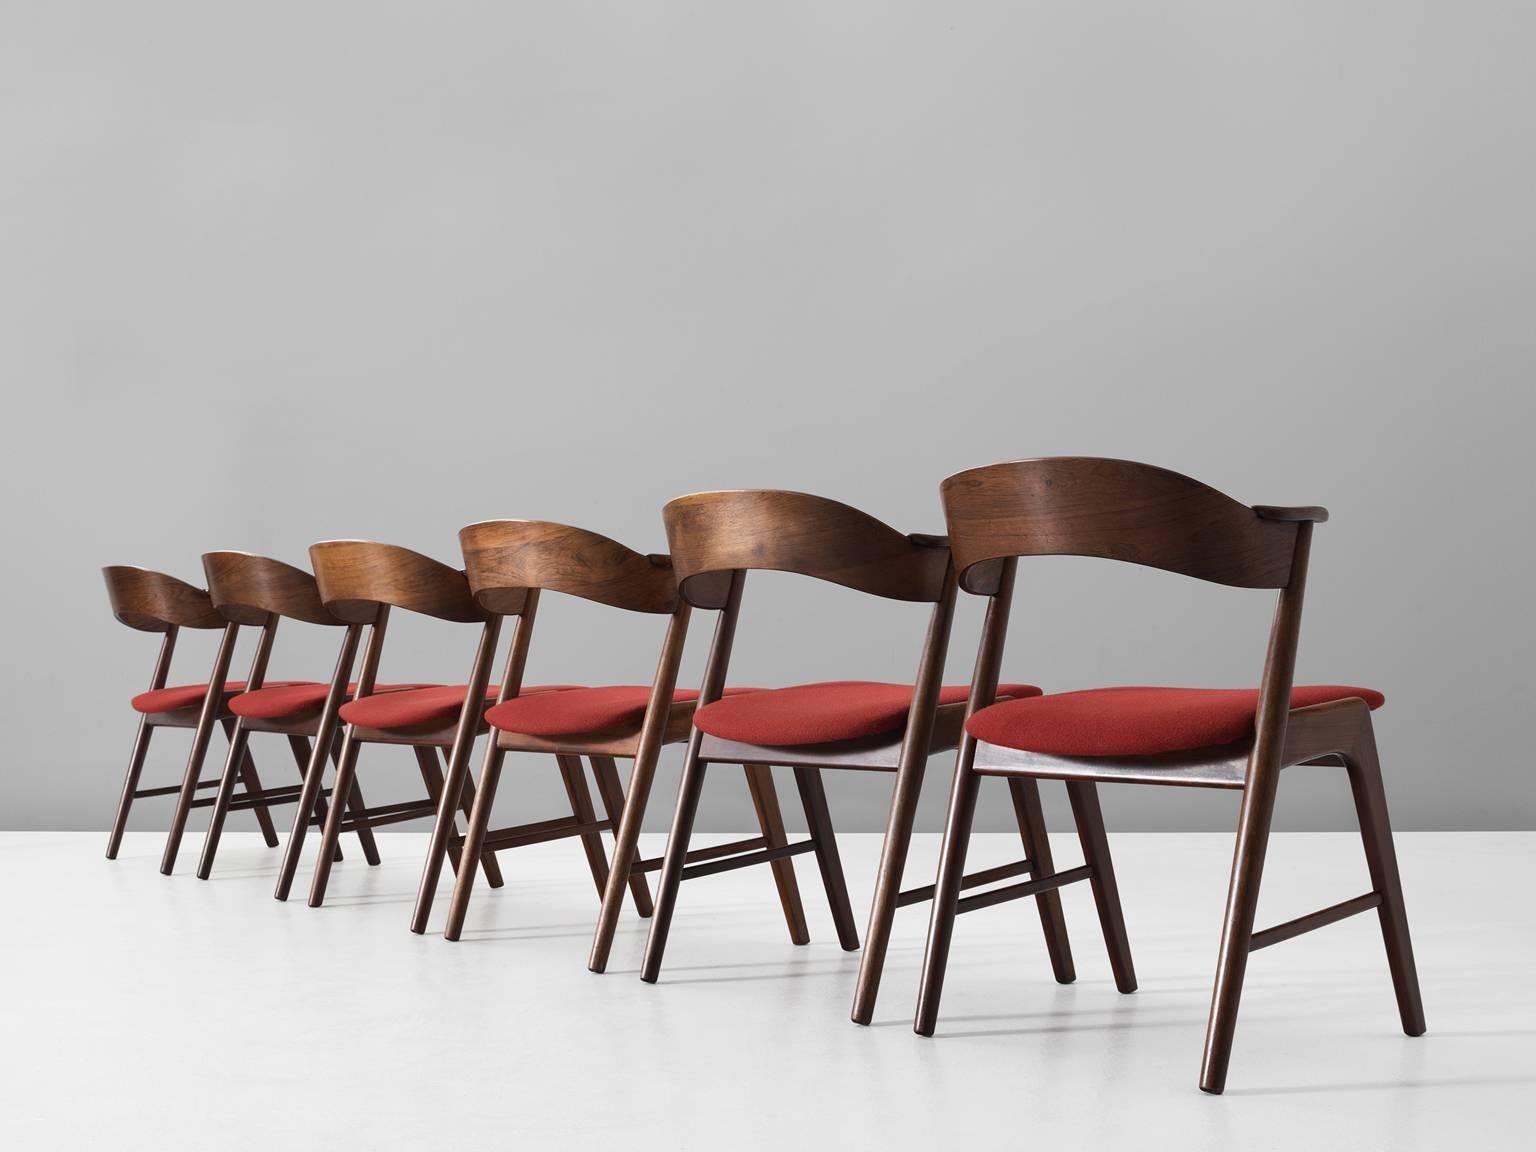 Set of six dining chairs in rosewood, teak and fabric by Kai Kristiansen for KS Møbler, Denmark, 1950s.

The chairs show beautiful and well designed lines and joints. The curved back and armrests are mounted on the oblique rear legs, which provides